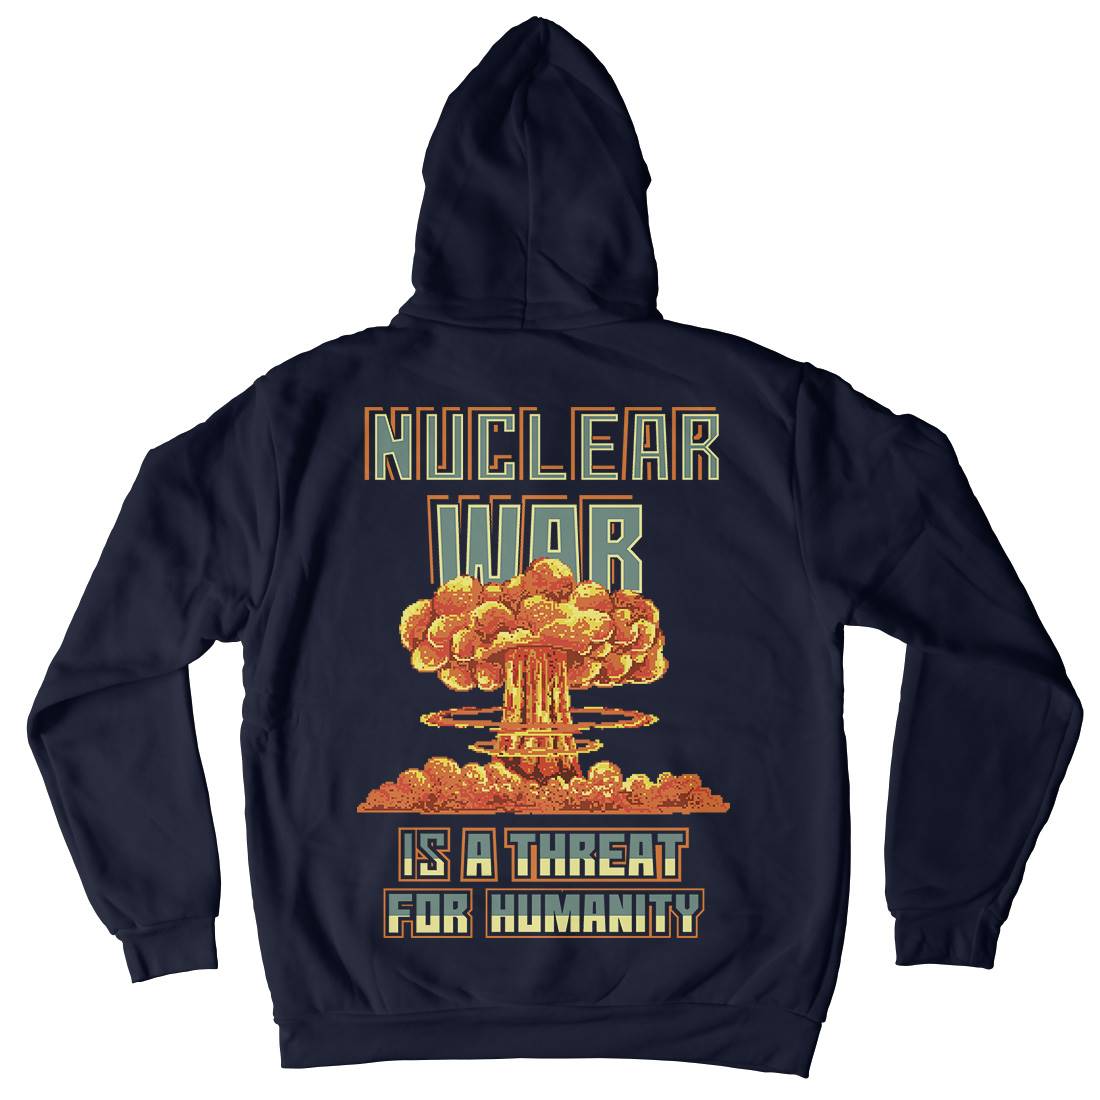 Nuclear War Is A Threat For Humanity Kids Crew Neck Hoodie Army B941